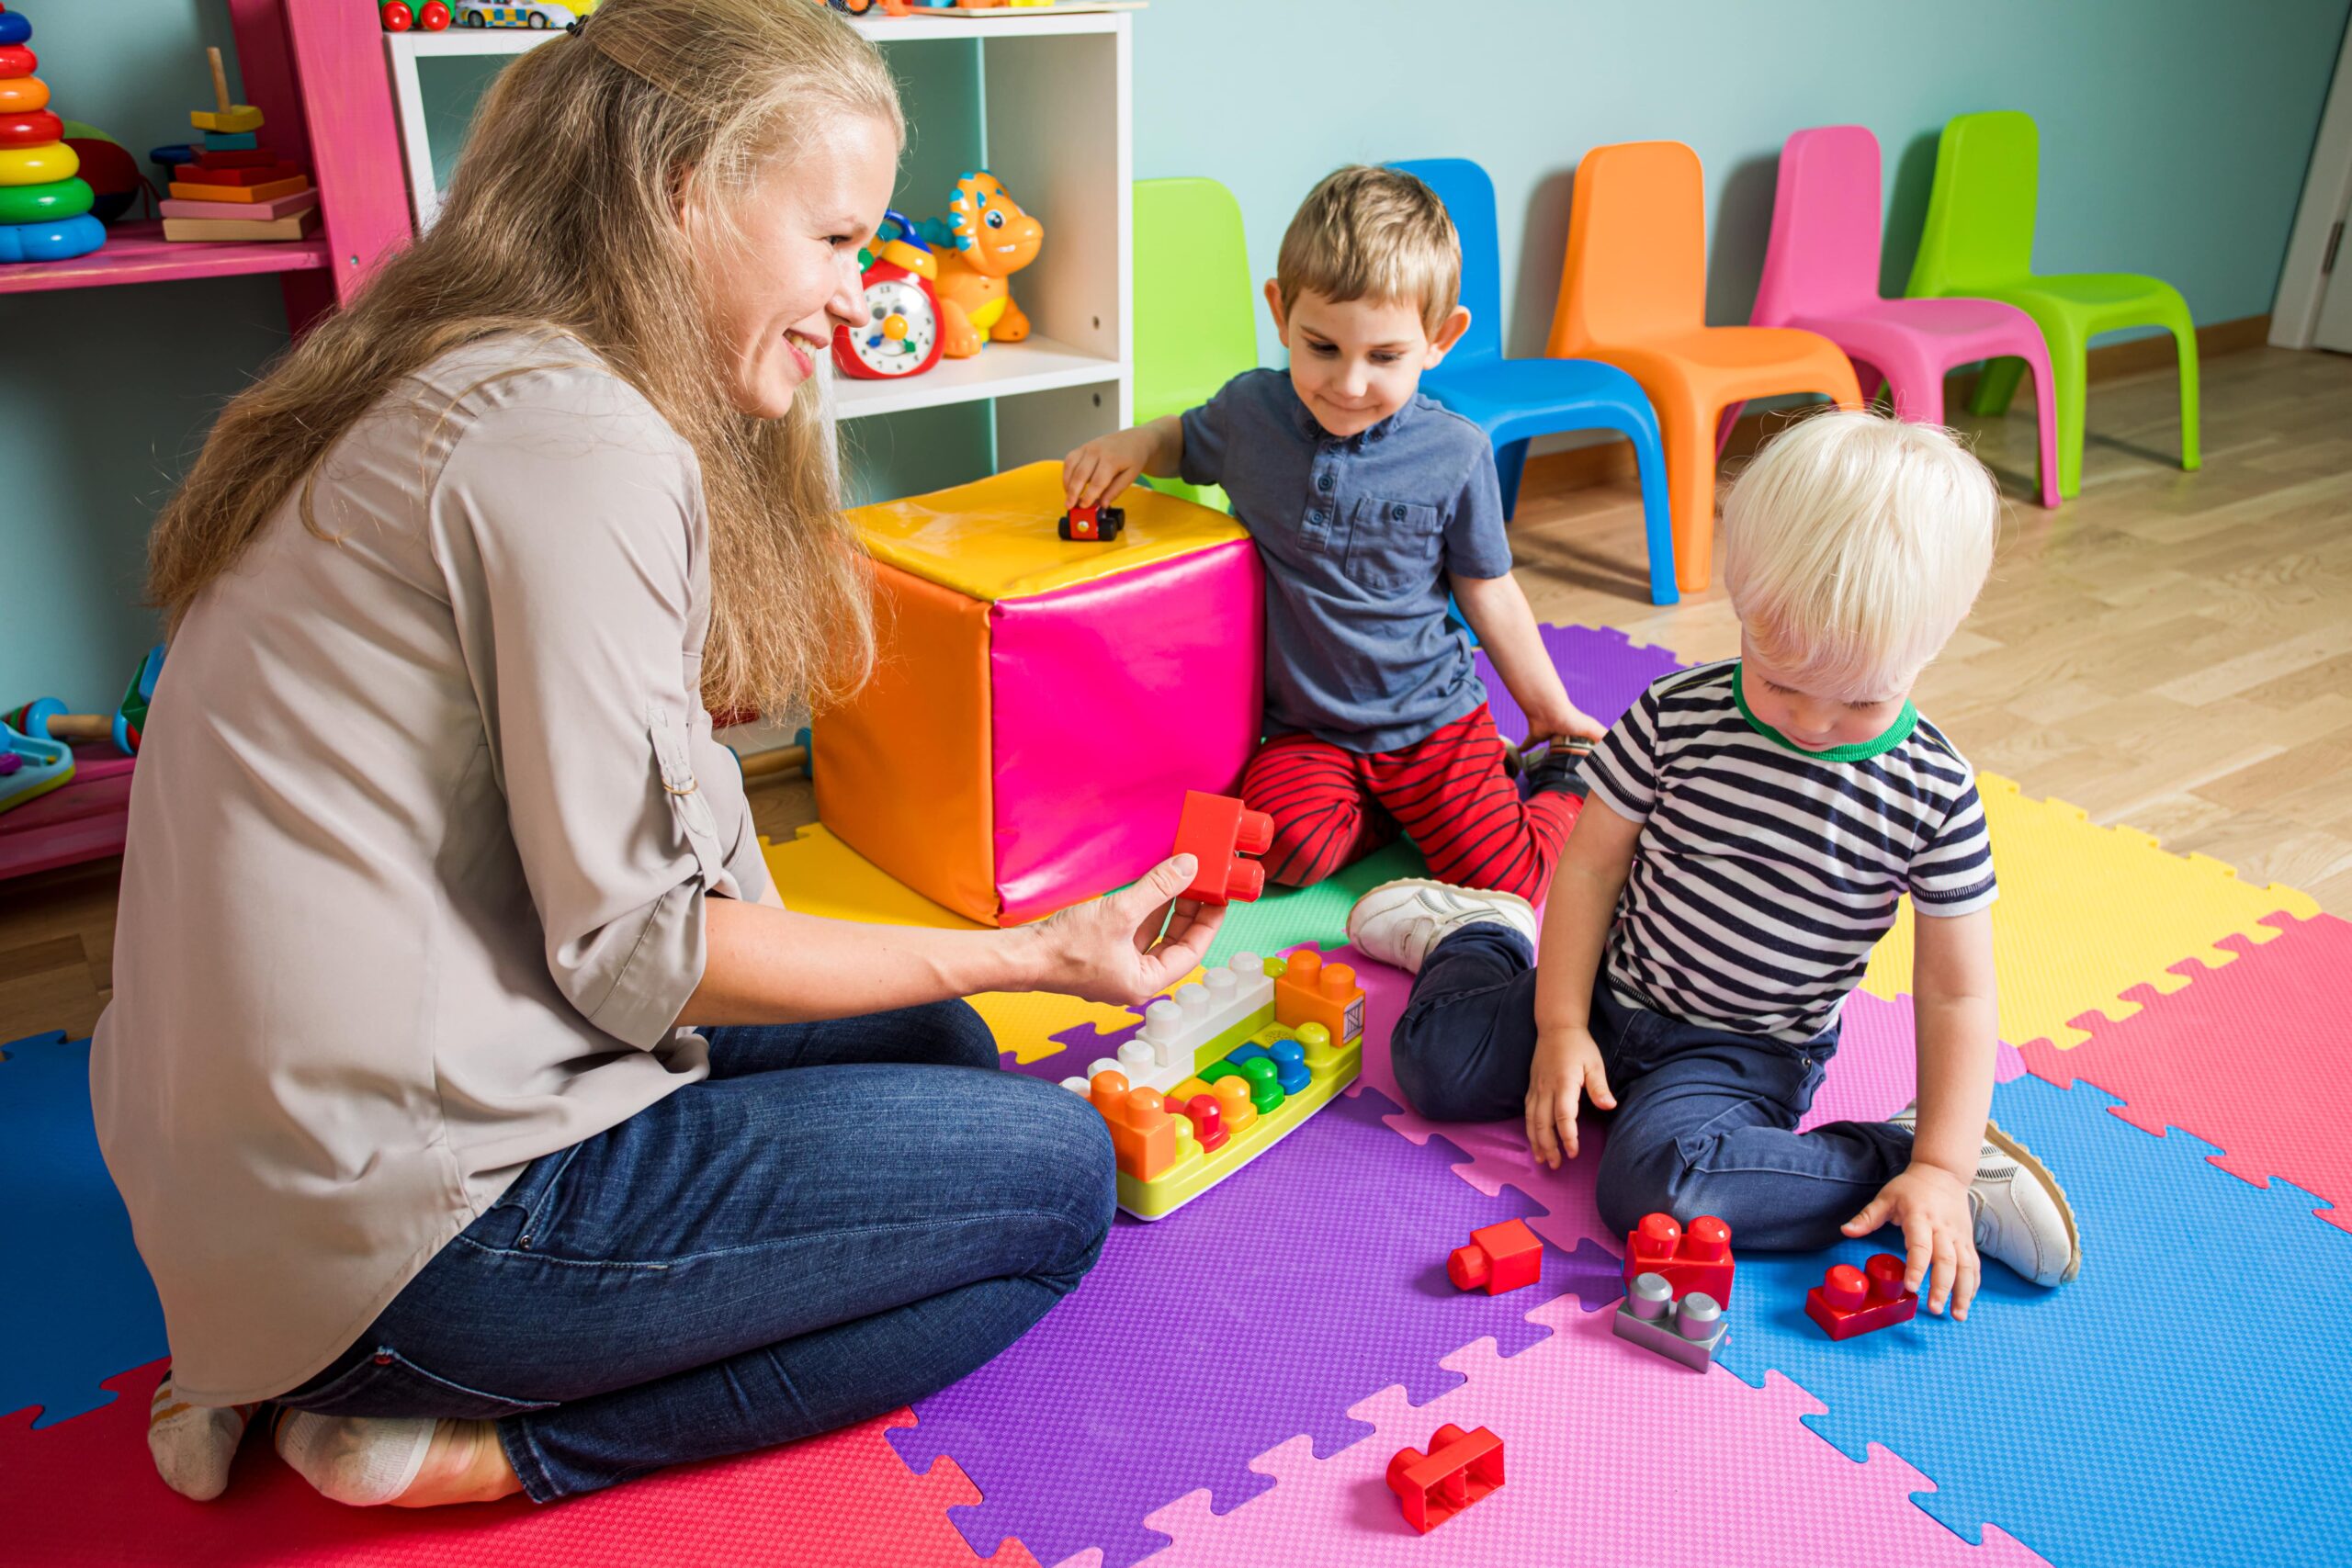 https://doradcy365.pl/wp-content/uploads/2022/04/two-little-boys-are-playing-with-kindergarten-teacher-woman-is-sitting-with-boys-floor-playroom-min-scaled.jpg